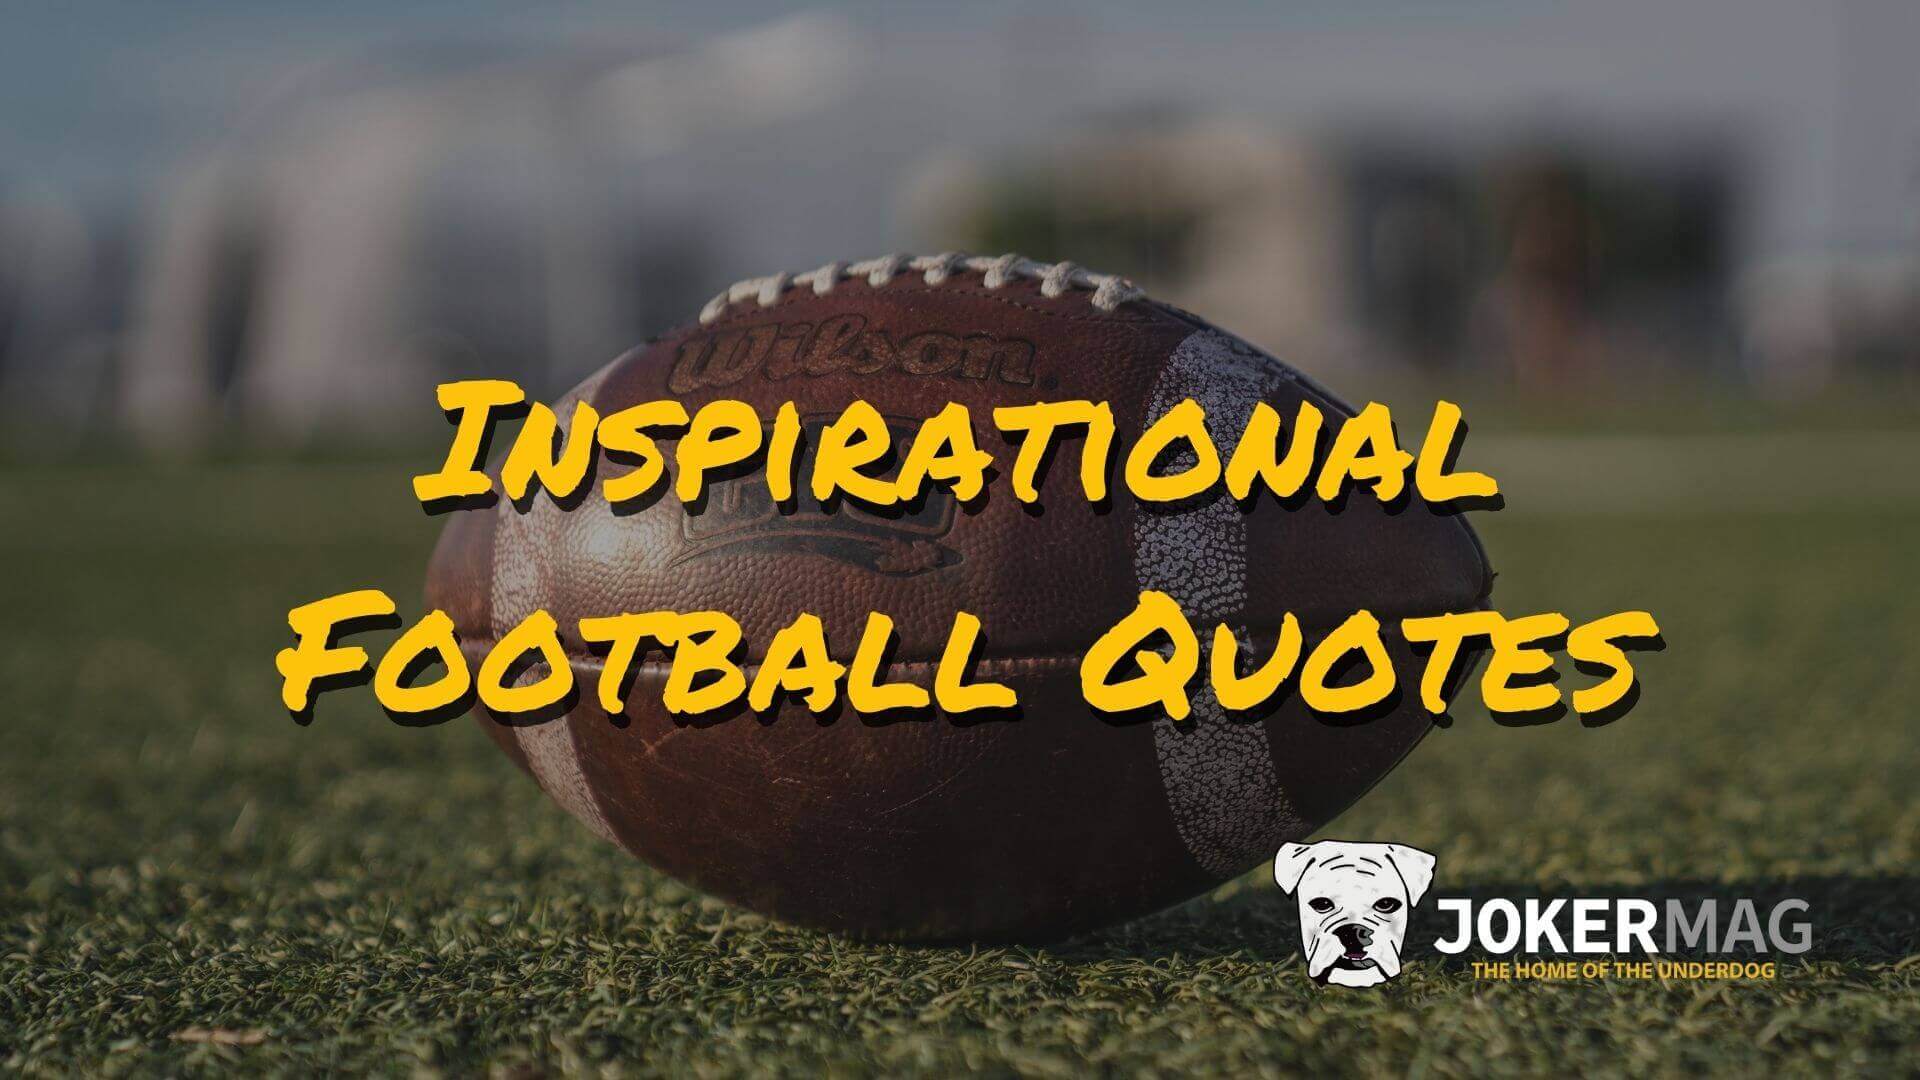 43 most inspirational football quotes ever, by Joker Mag – the home of the underdog